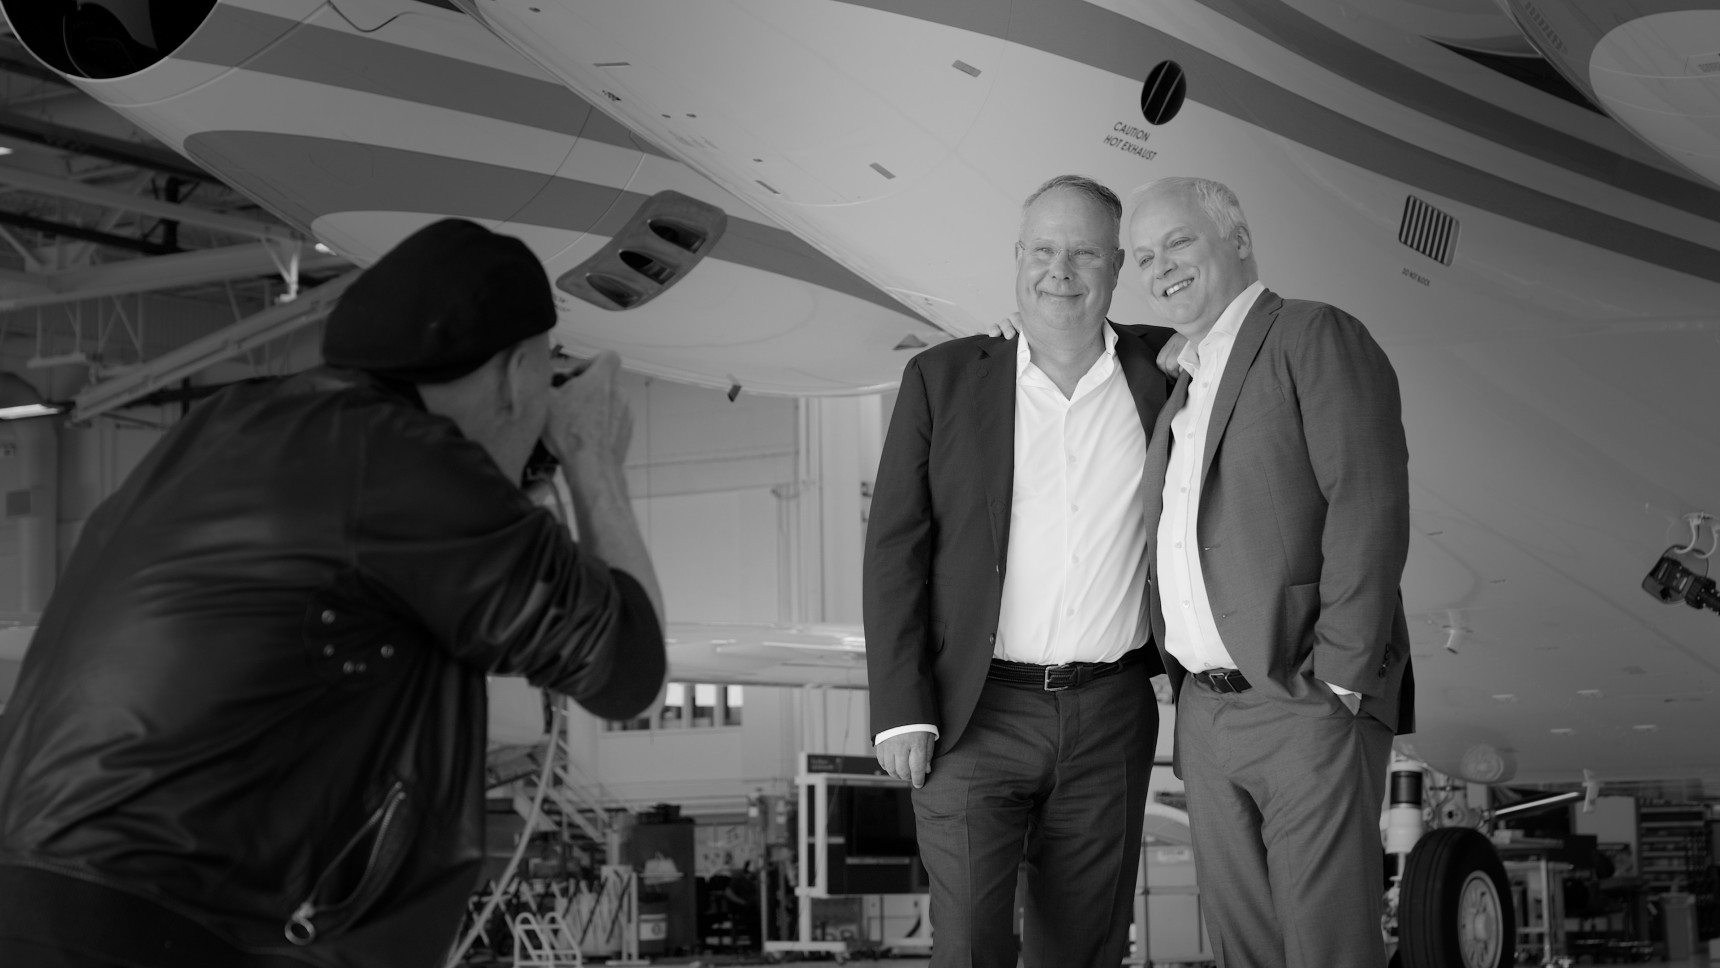 Carl Lessard, Capturing Moments with Top Executives at Bombardier's Photoshoot 